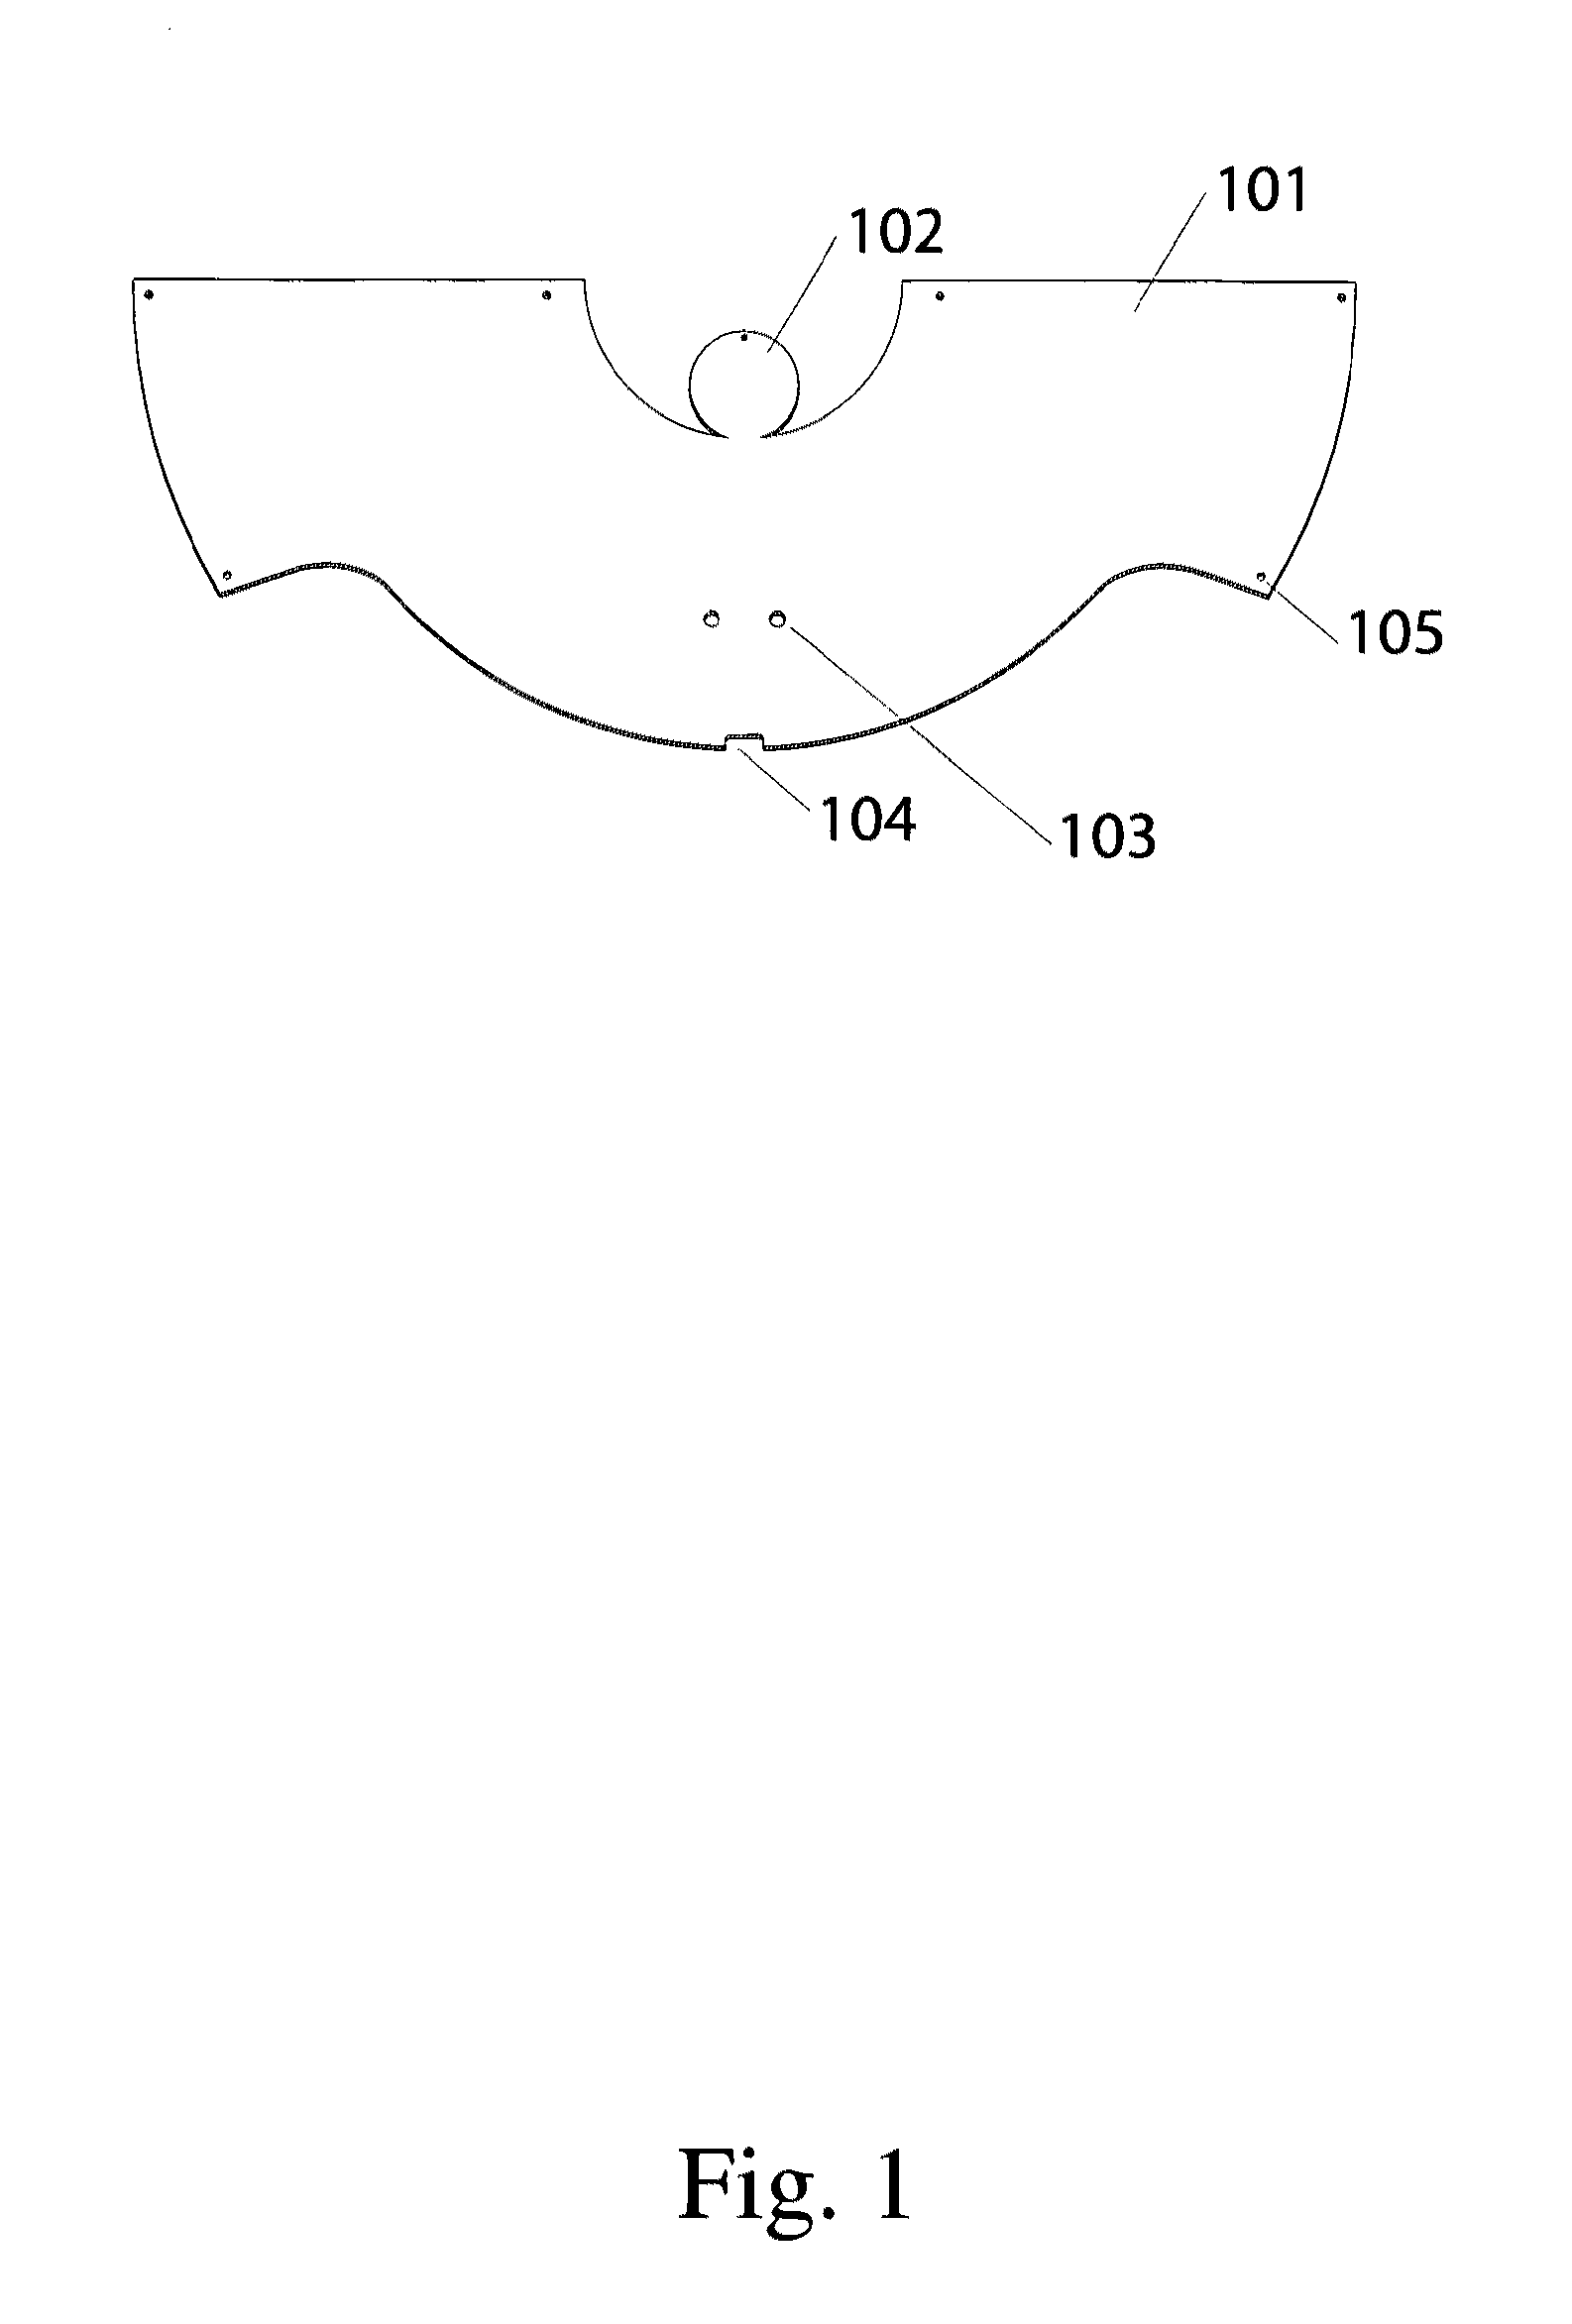 Electronic cymbal assembly with modular self-dampening triggering system